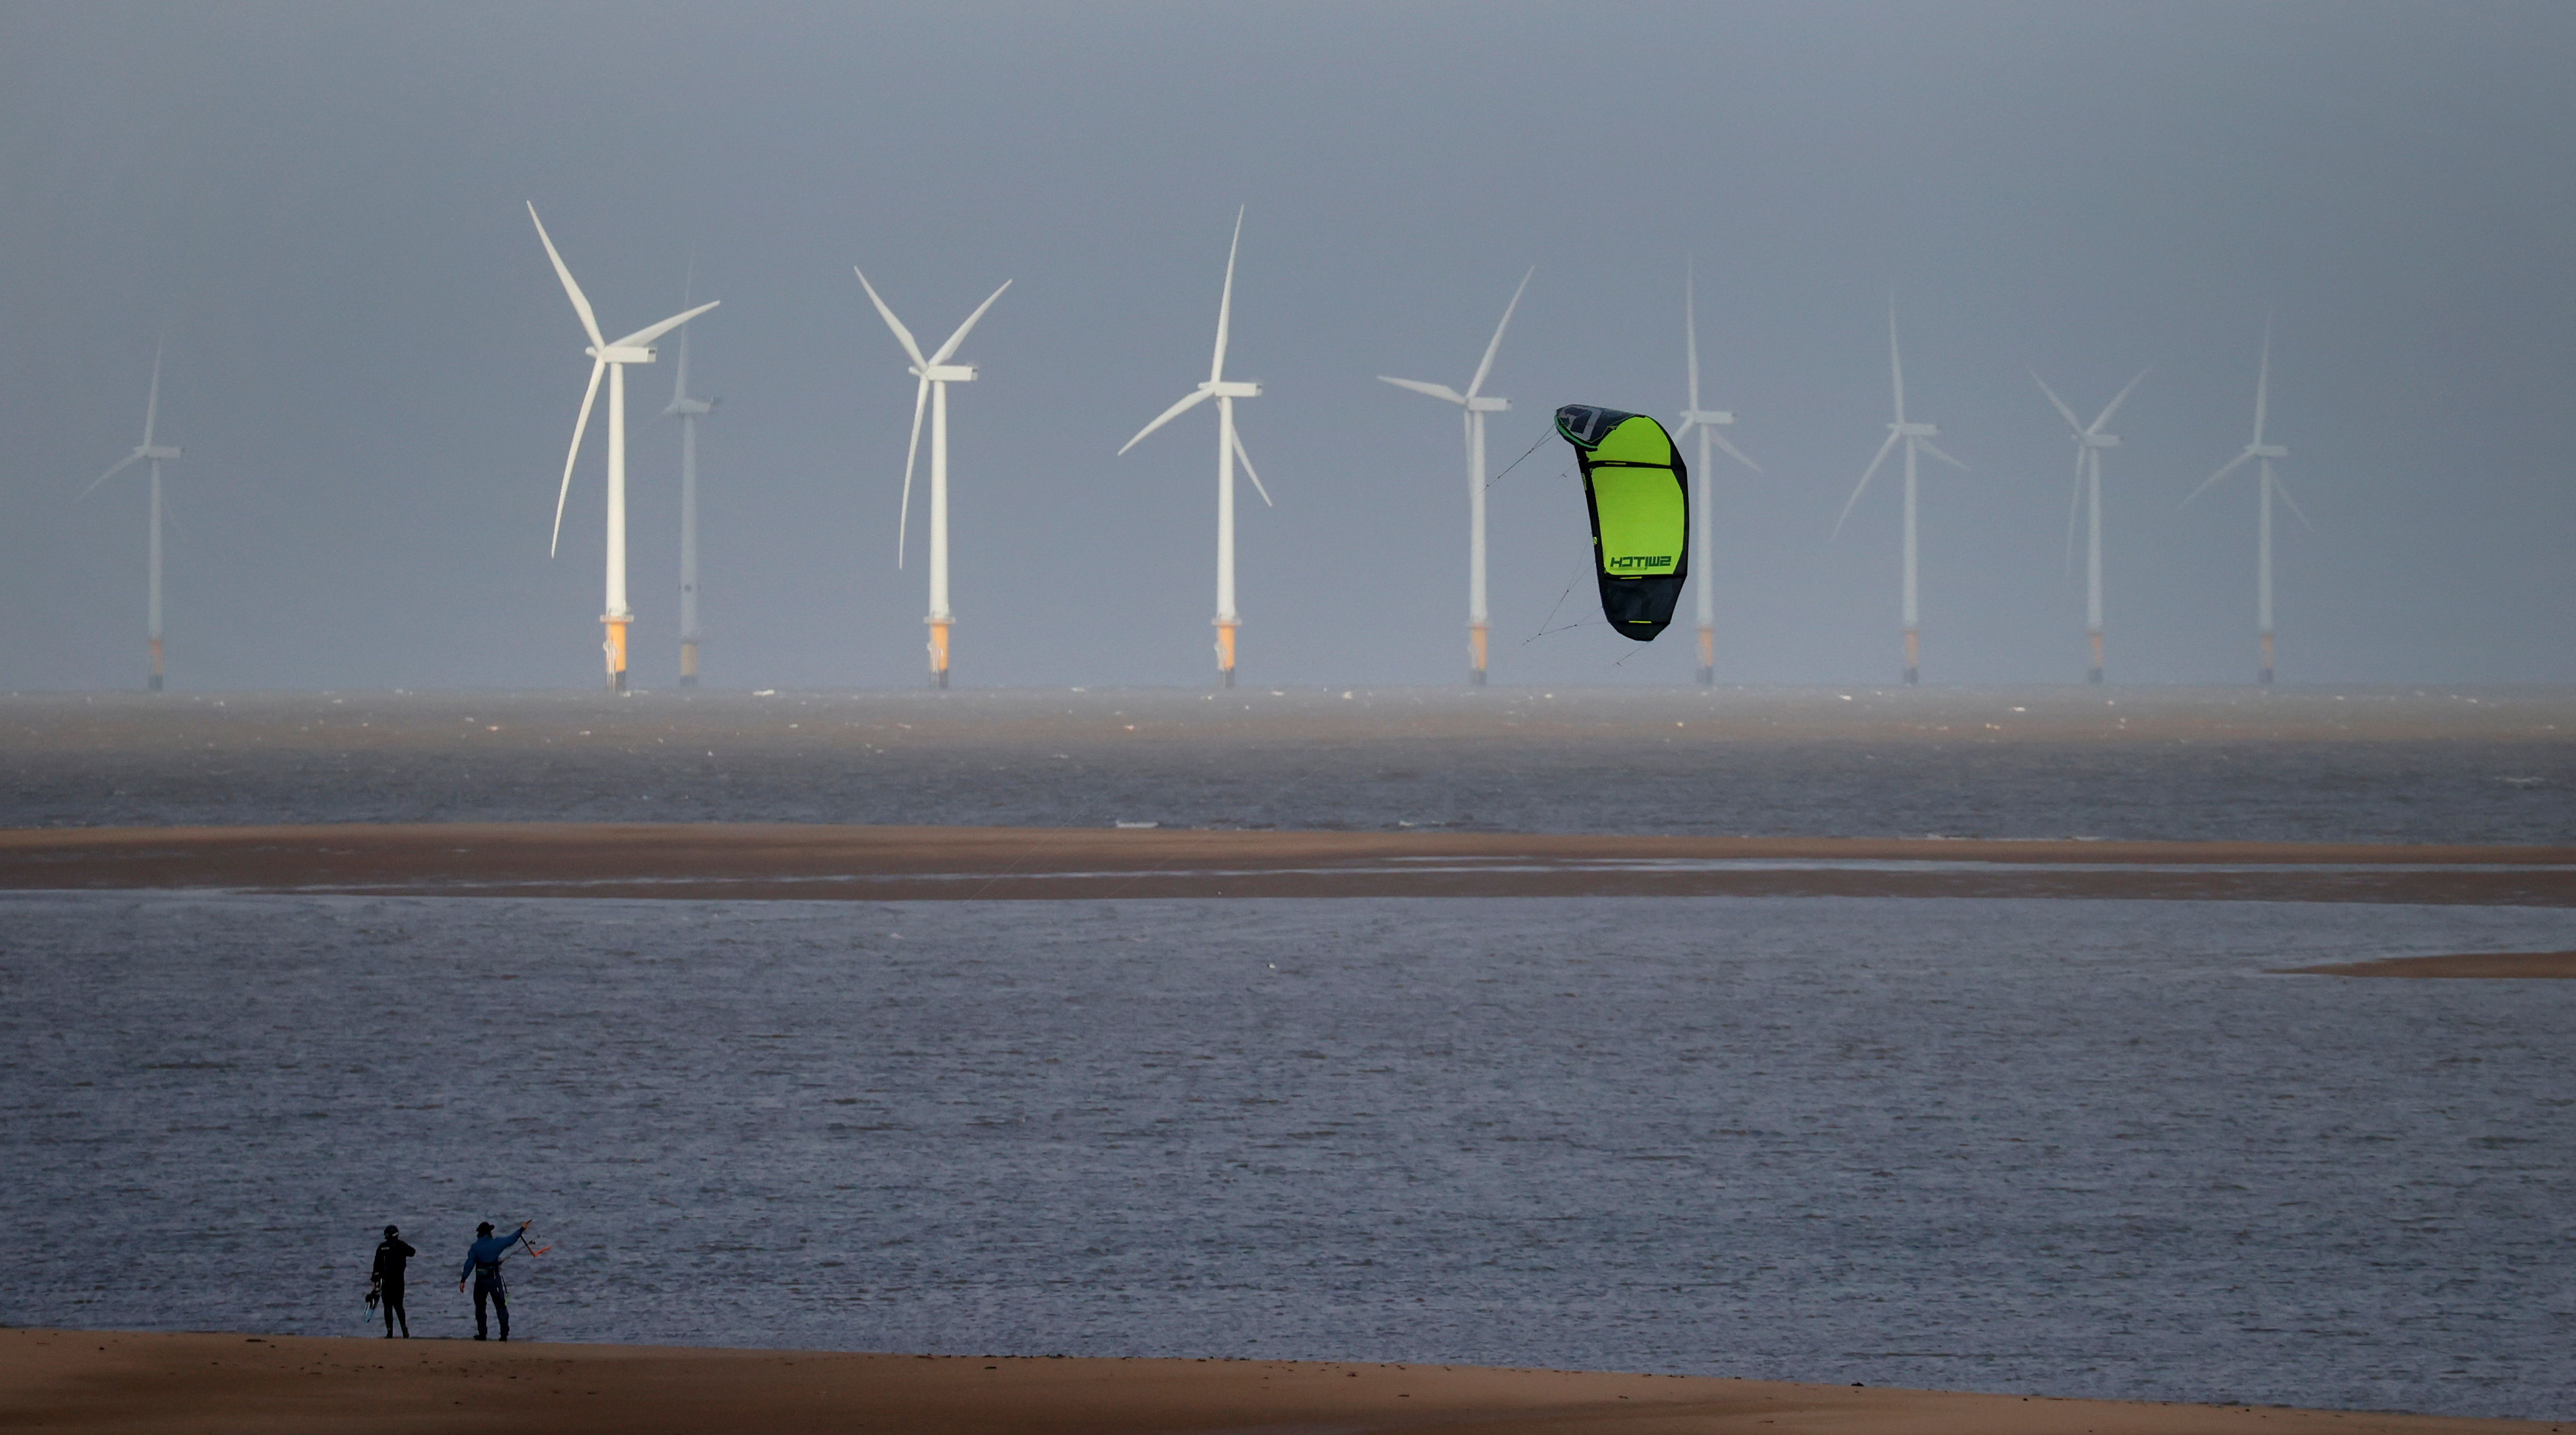 Kite surfers are pictured in front of the Burbo Bank offshore wind farm near New Brighton